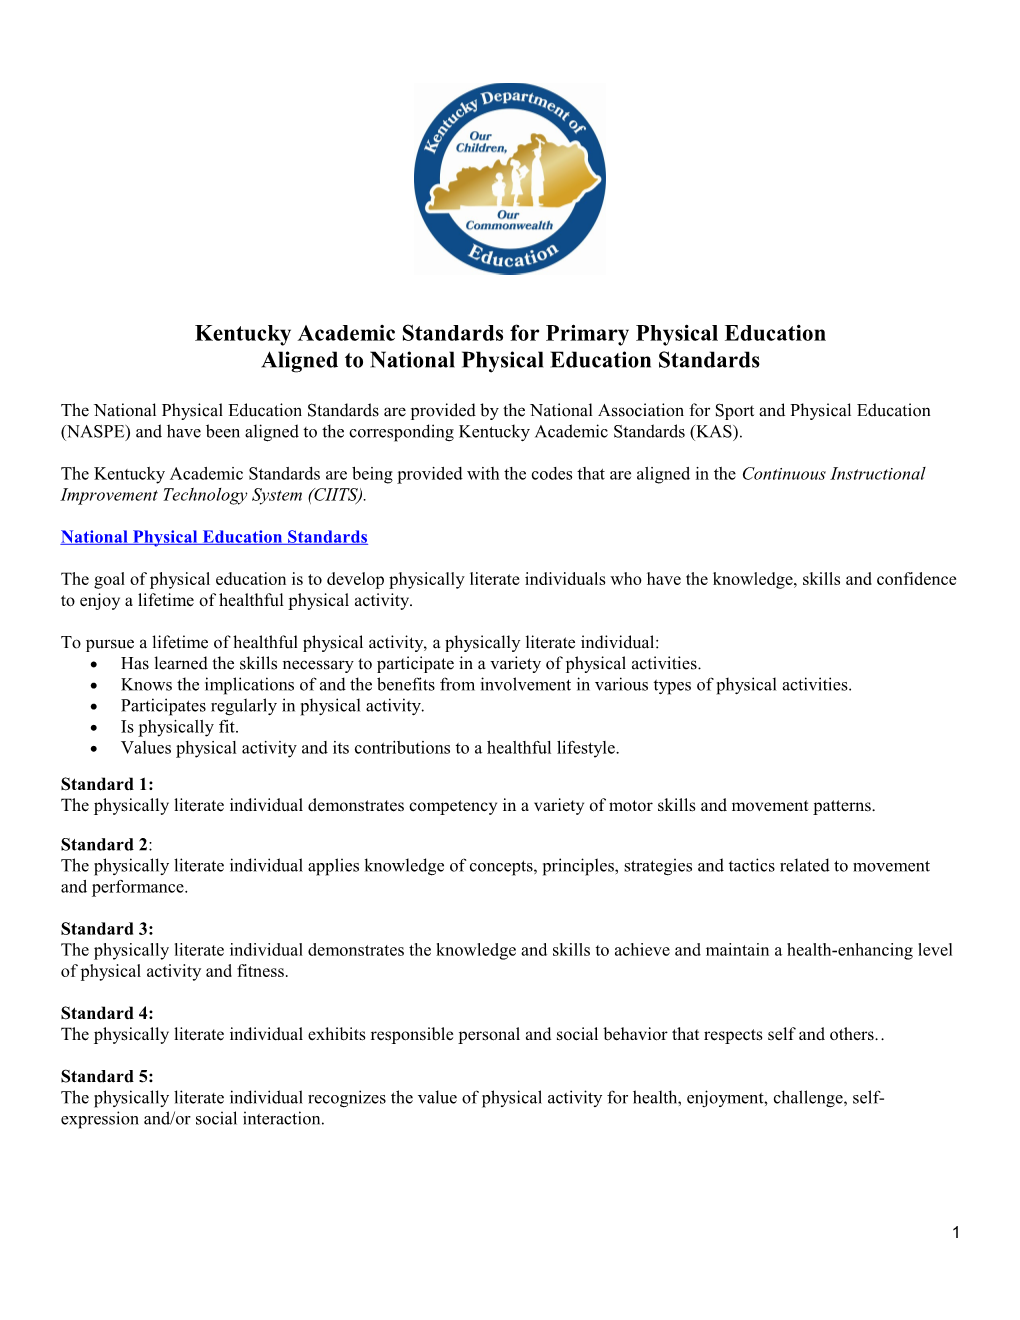 Kentucky Academic Standards for Primary Physical Education